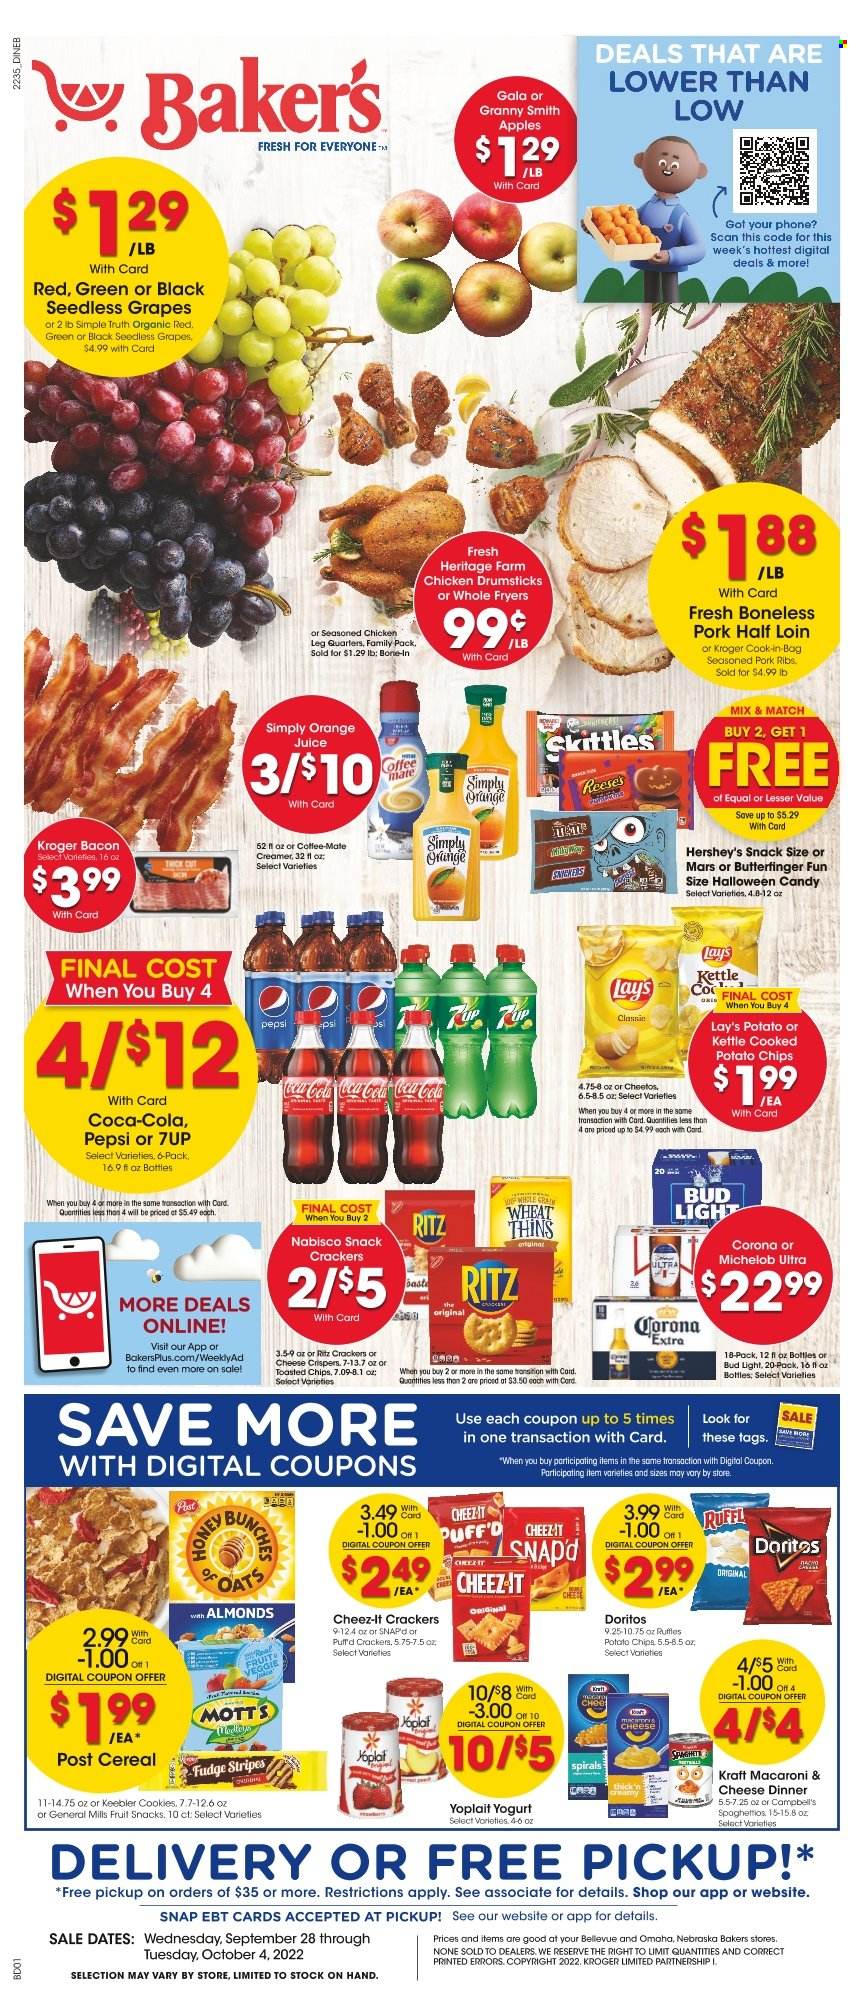 thumbnail - Baker's Flyer - 09/28/2022 - 10/04/2022 - Sales products - apples, Gala, grapes, seedless grapes, Granny Smith, Mott's, Campbell's, macaroni & cheese, Kraft®, bacon, yoghurt, Yoplait, Coffee-Mate, creamer, Reese's, Hershey's, cookies, fudge, Mars, crackers, Skittles, fruit snack, Keebler, RITZ, Doritos, potato chips, Cheetos, chips, Lay’s, Thins, Cheez-It, Ruffles, oats, cereals, honey, Coca-Cola, Pepsi, orange juice, juice, 7UP, beer, Bud Light, Corona Extra, chicken legs, chicken drumsticks, pork meat, pork ribs, Bakers, Halloween, Michelob. Page 1.